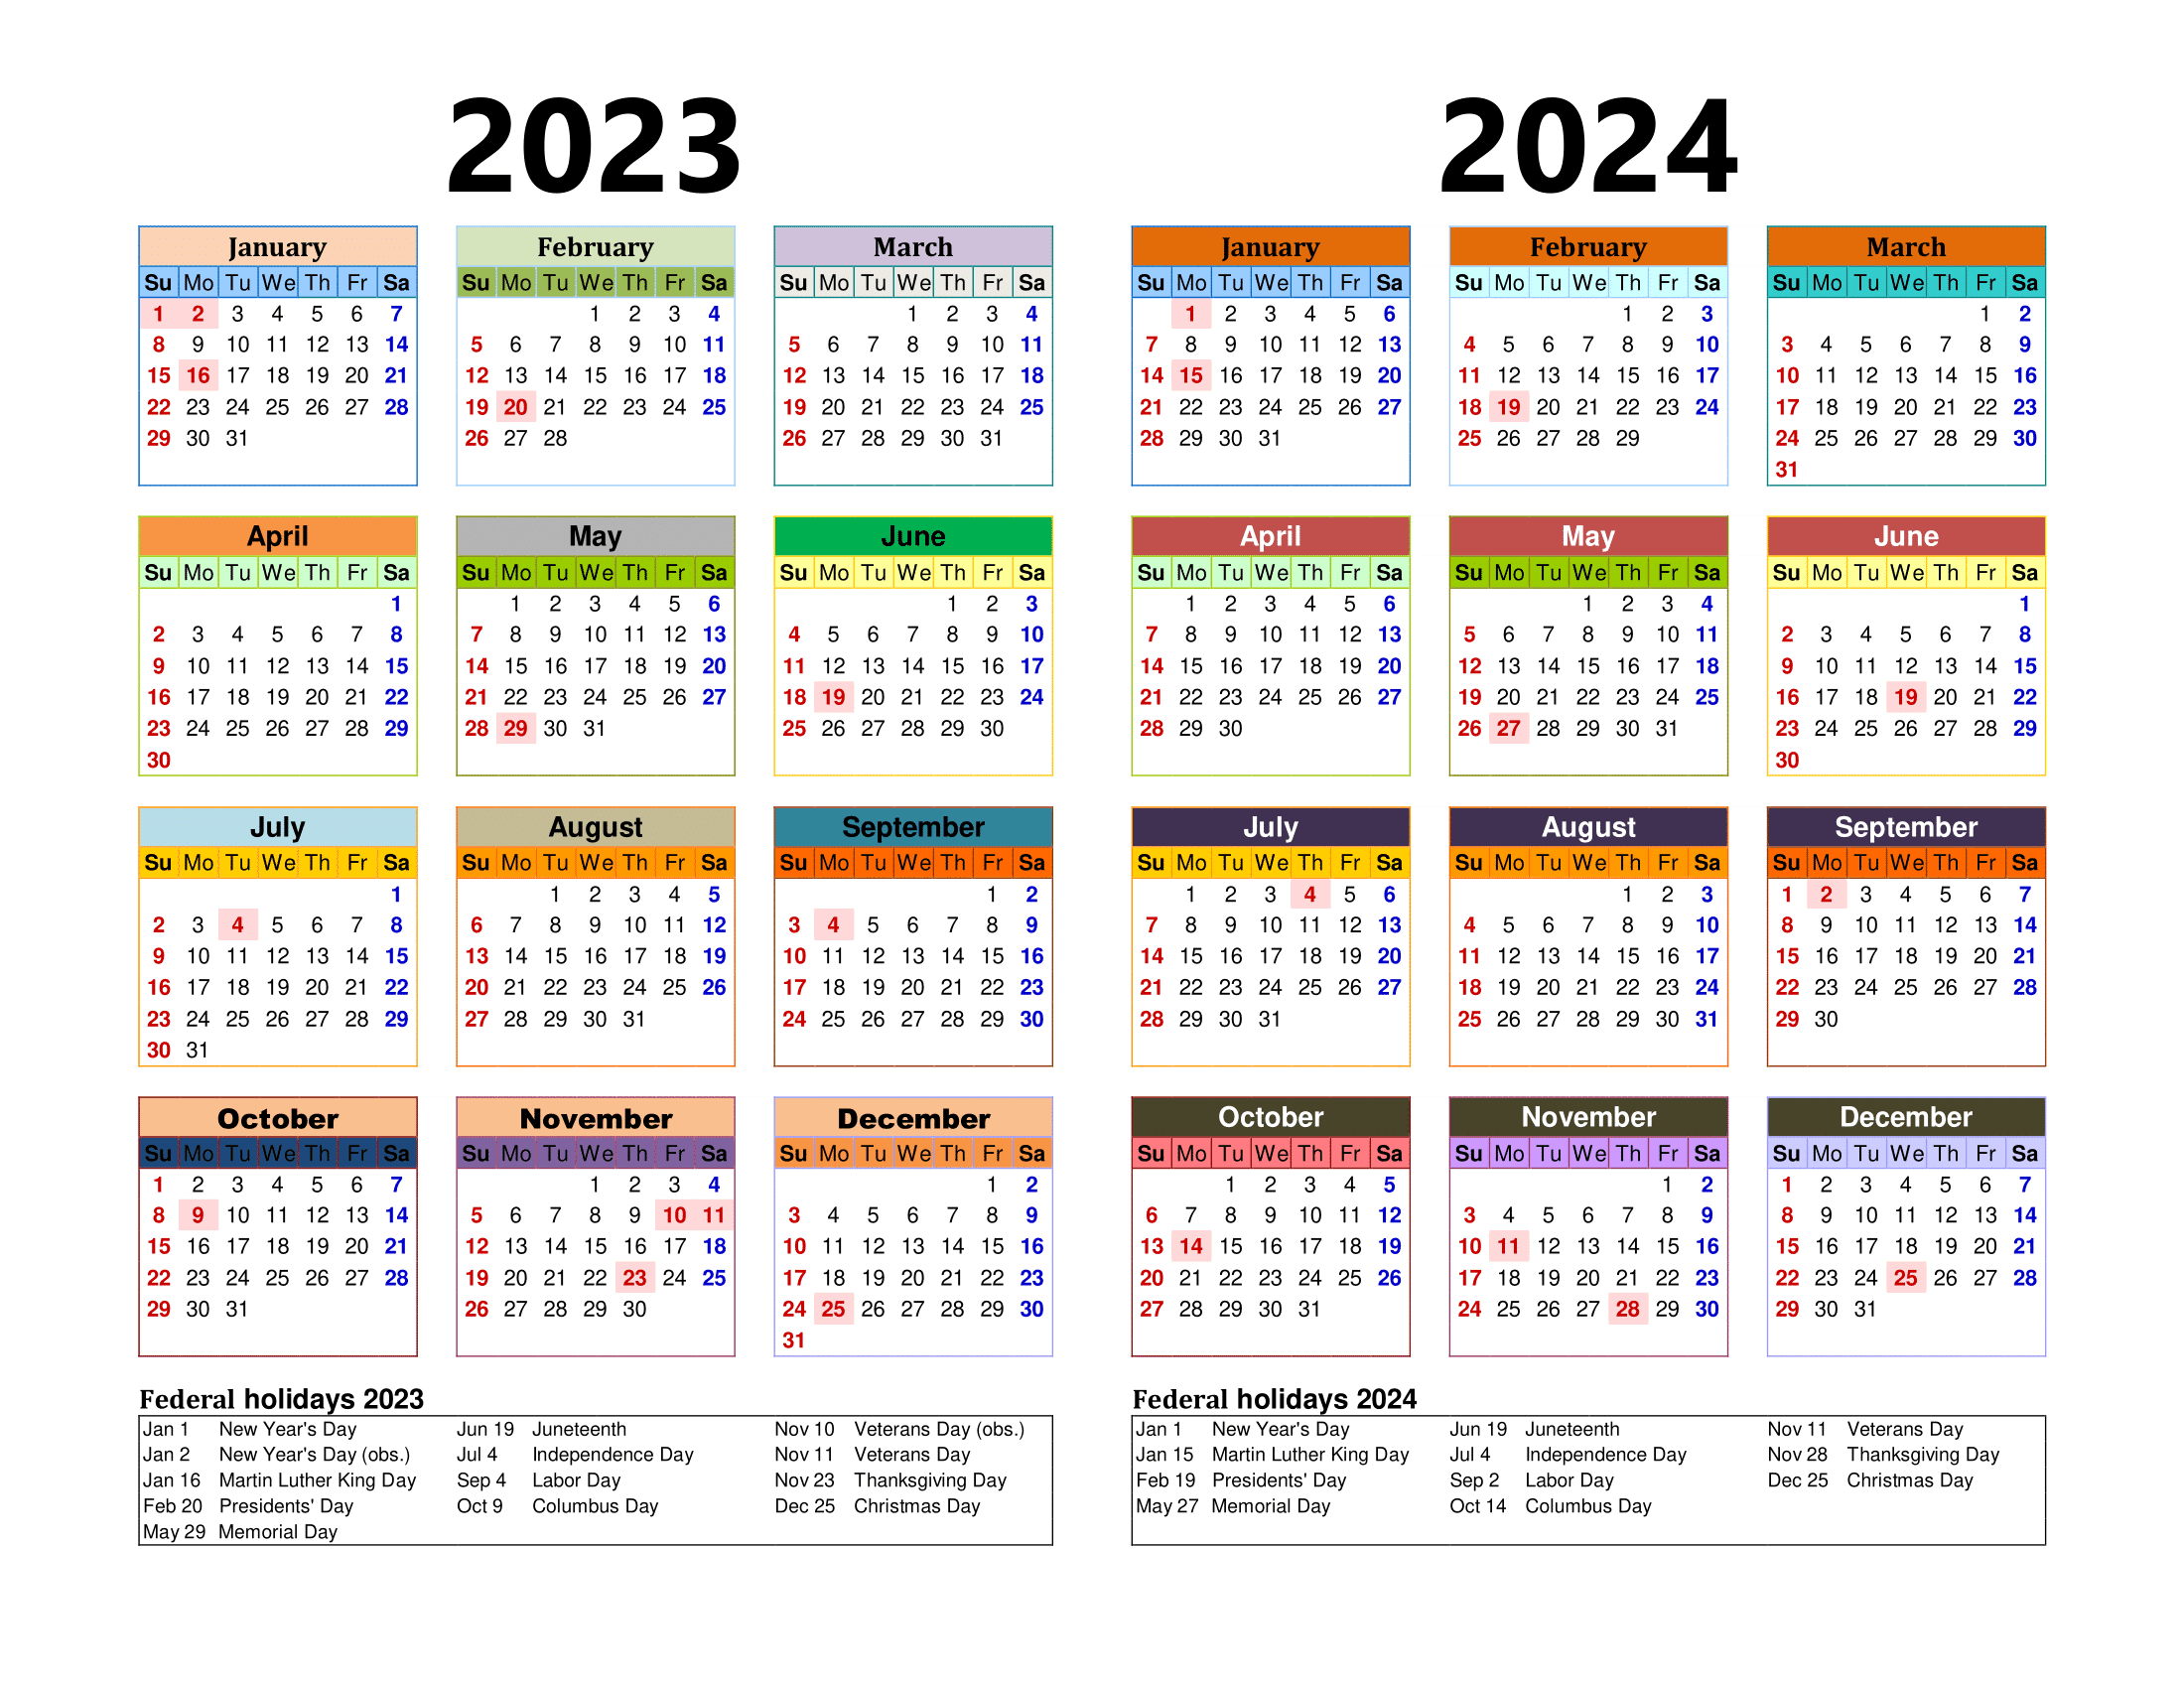 Free Printable Two Year Calendar Templates For 2023 And 2024 In Pdf for Free Printable 2023 And 2024 Calendar Printable